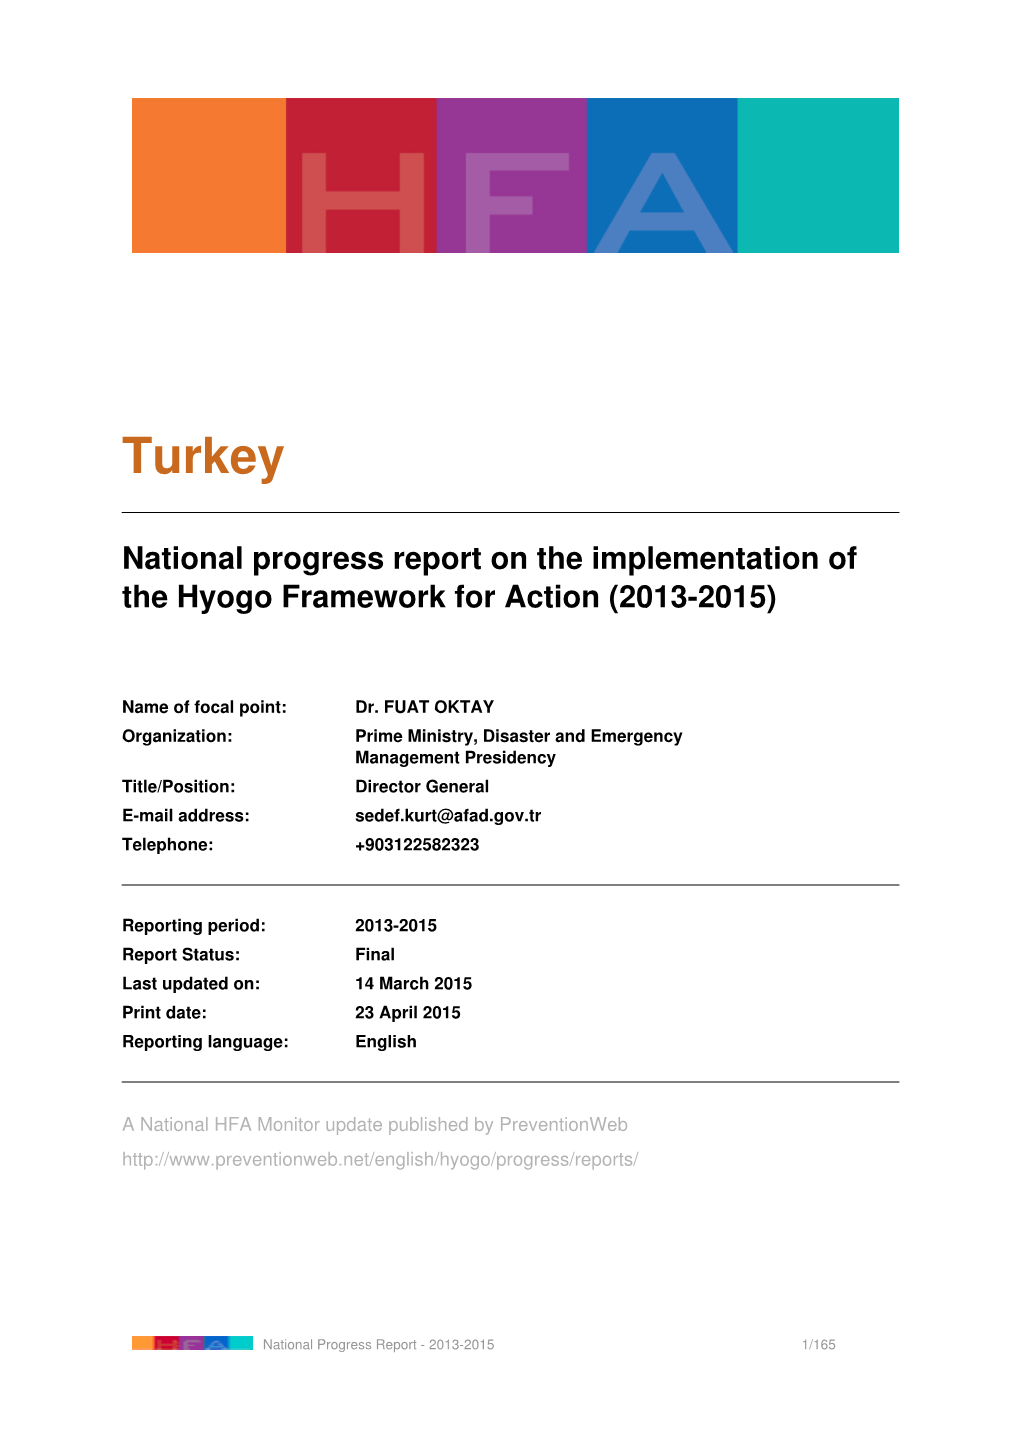 Turkey: National Progress Report on the Implementation of the Hyogo